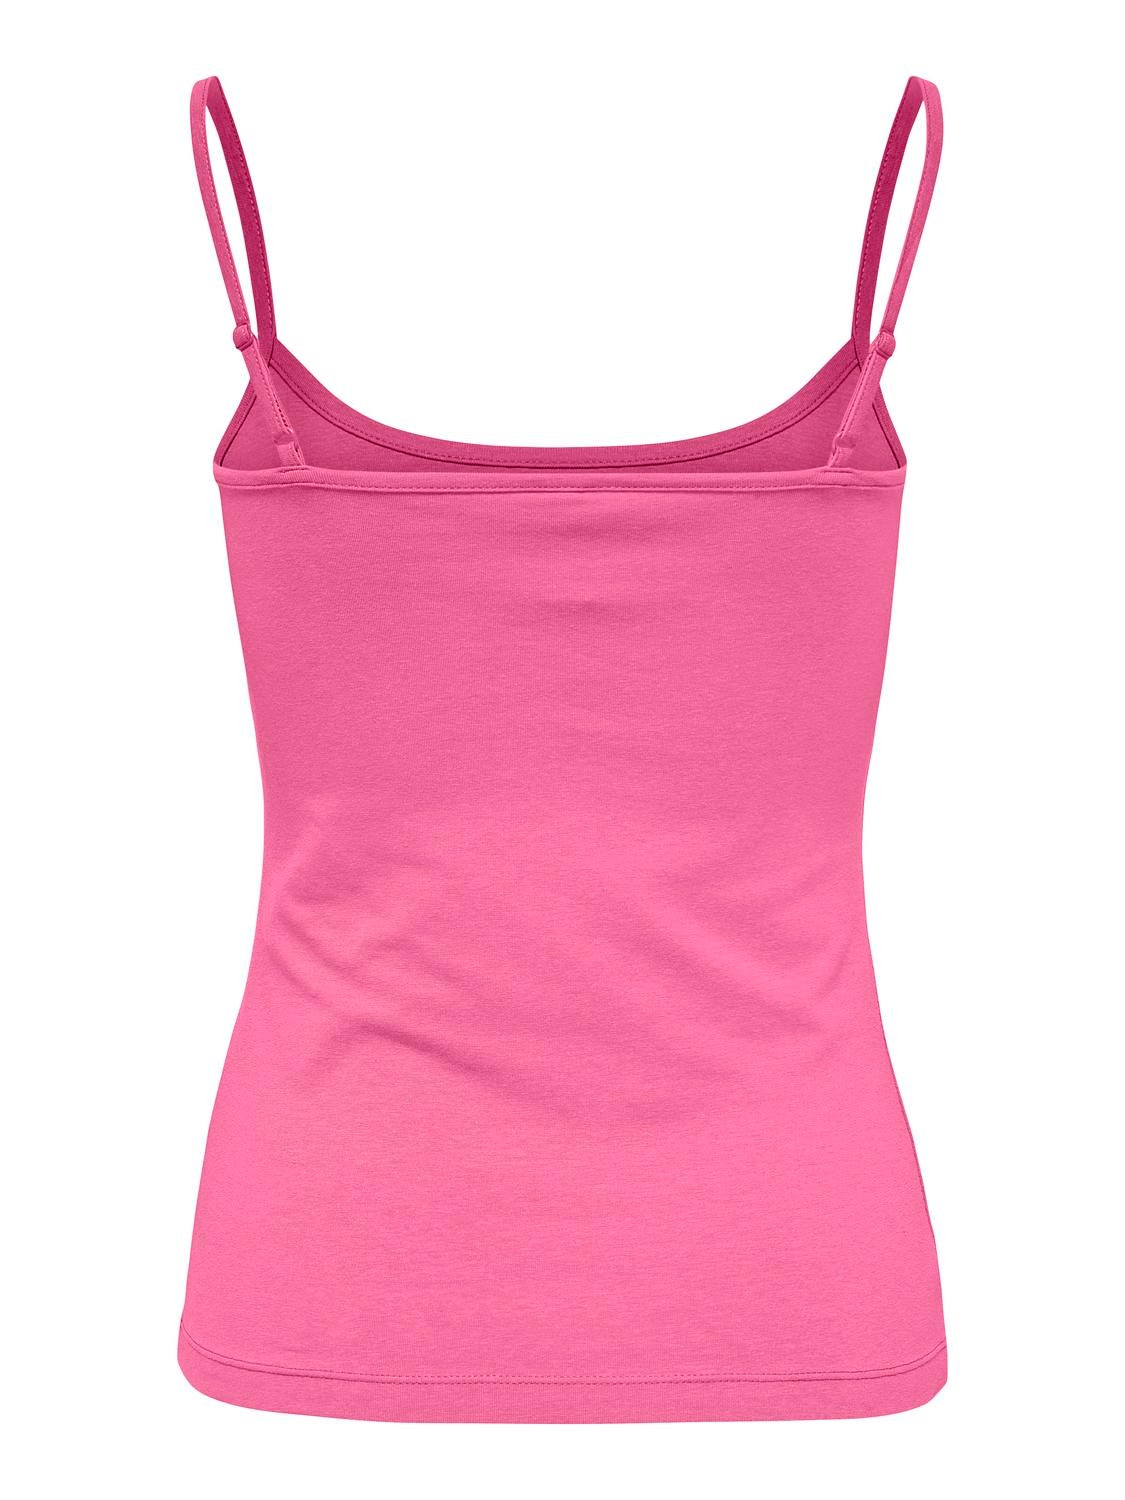 ONLY Couleur unie Top sans manches -Pink Power - 15148401